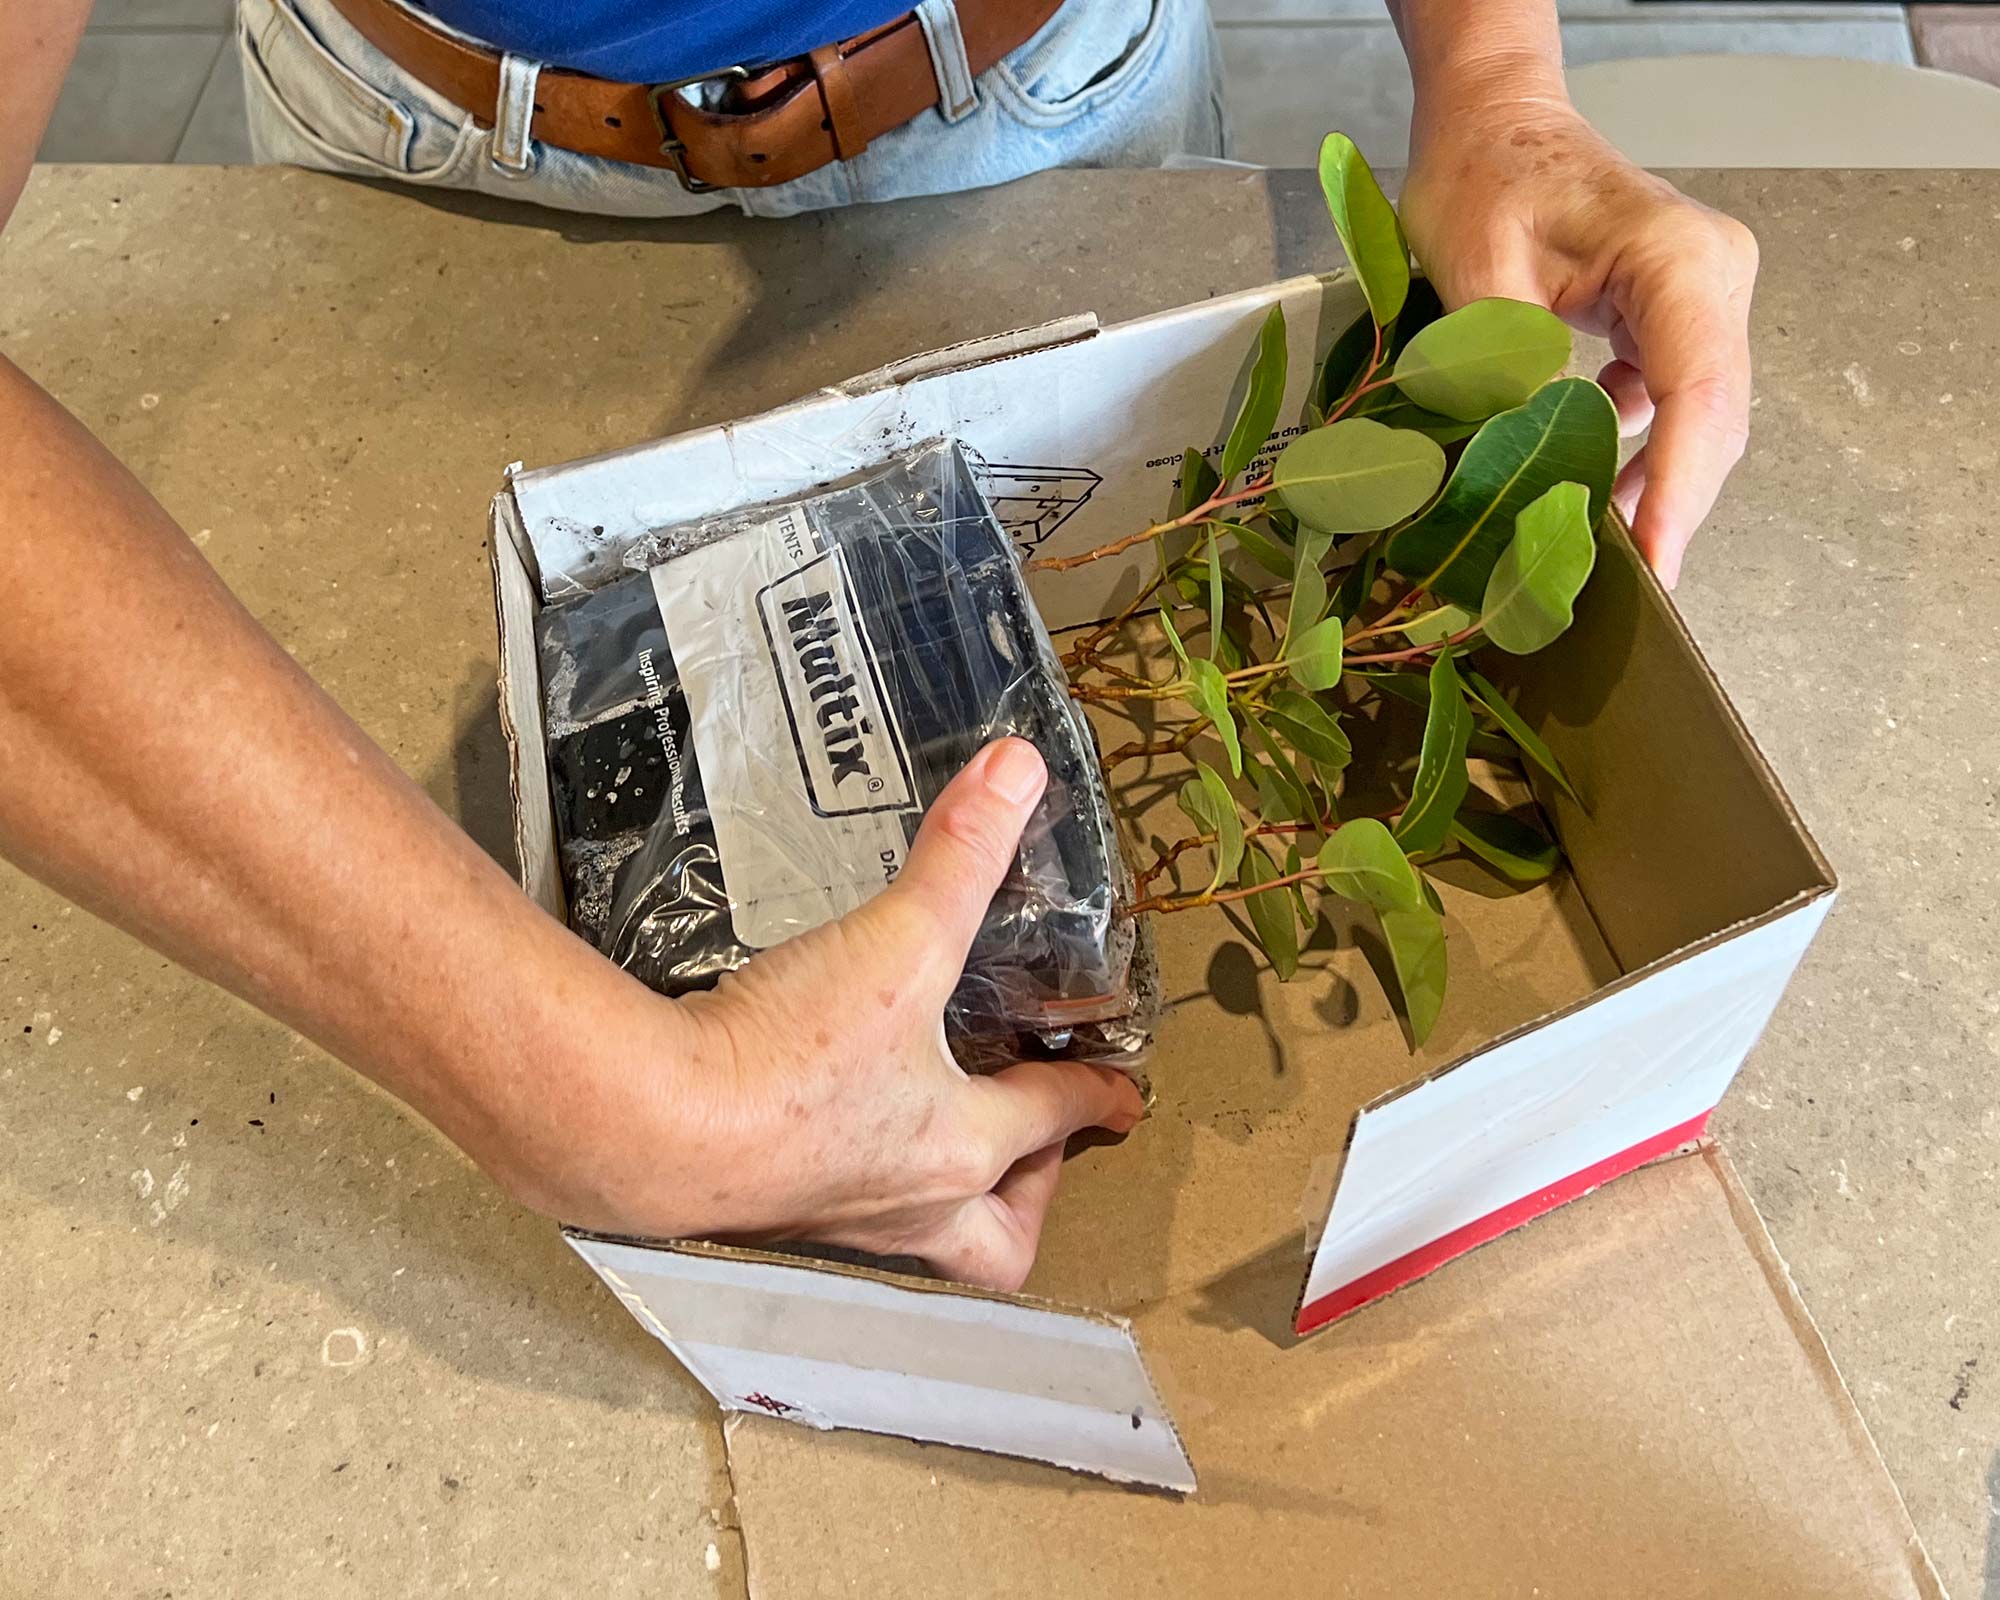 A sample selection of 50mm tube-stock plants securely packed in medium sized carton